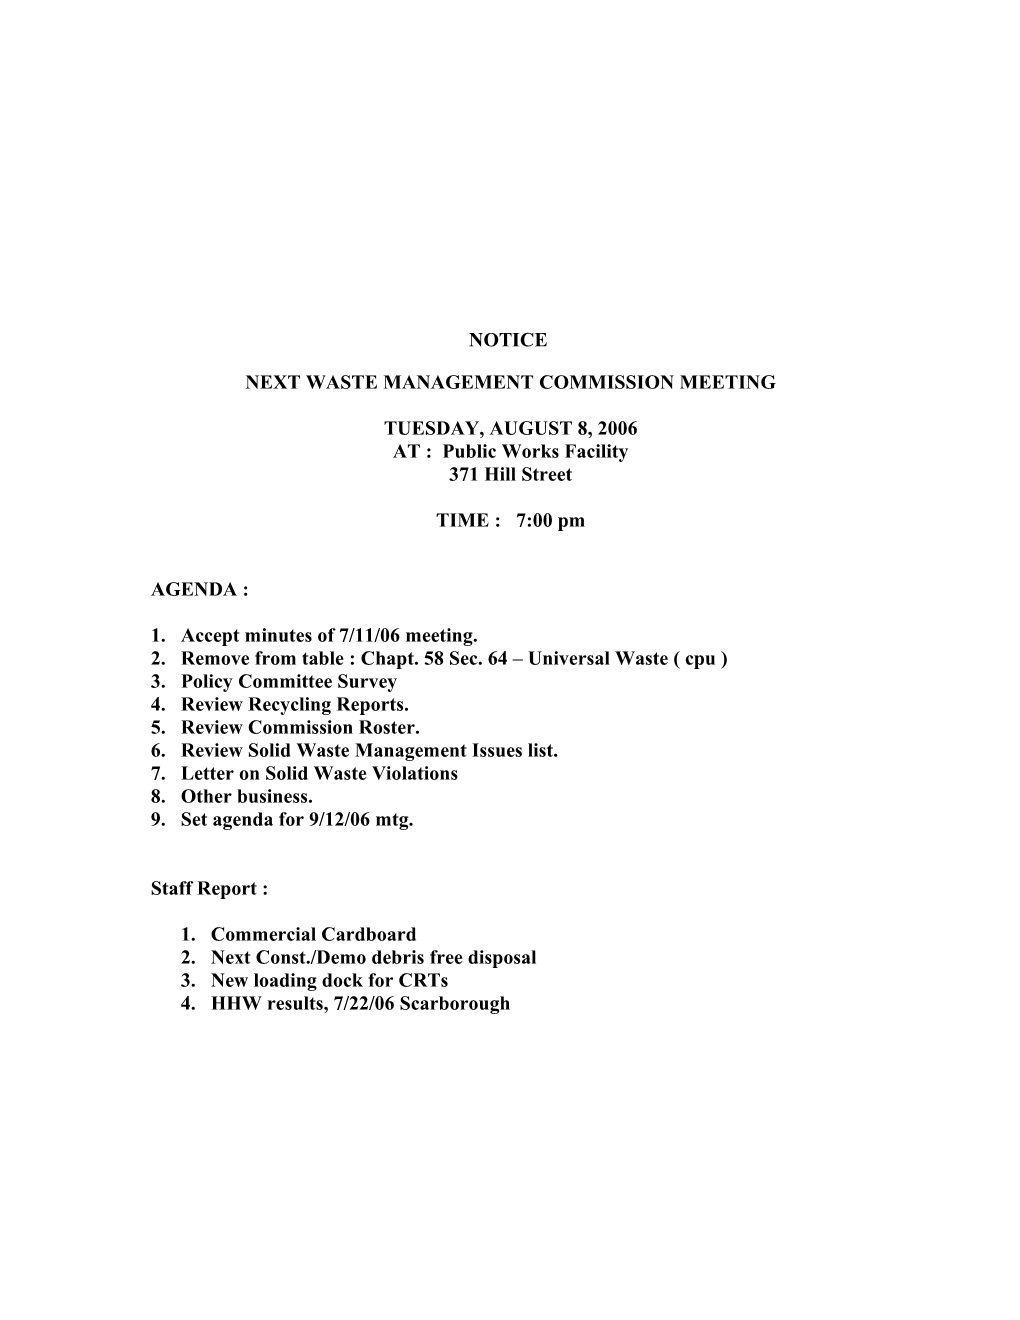 Next Waste Management Commission Meeting